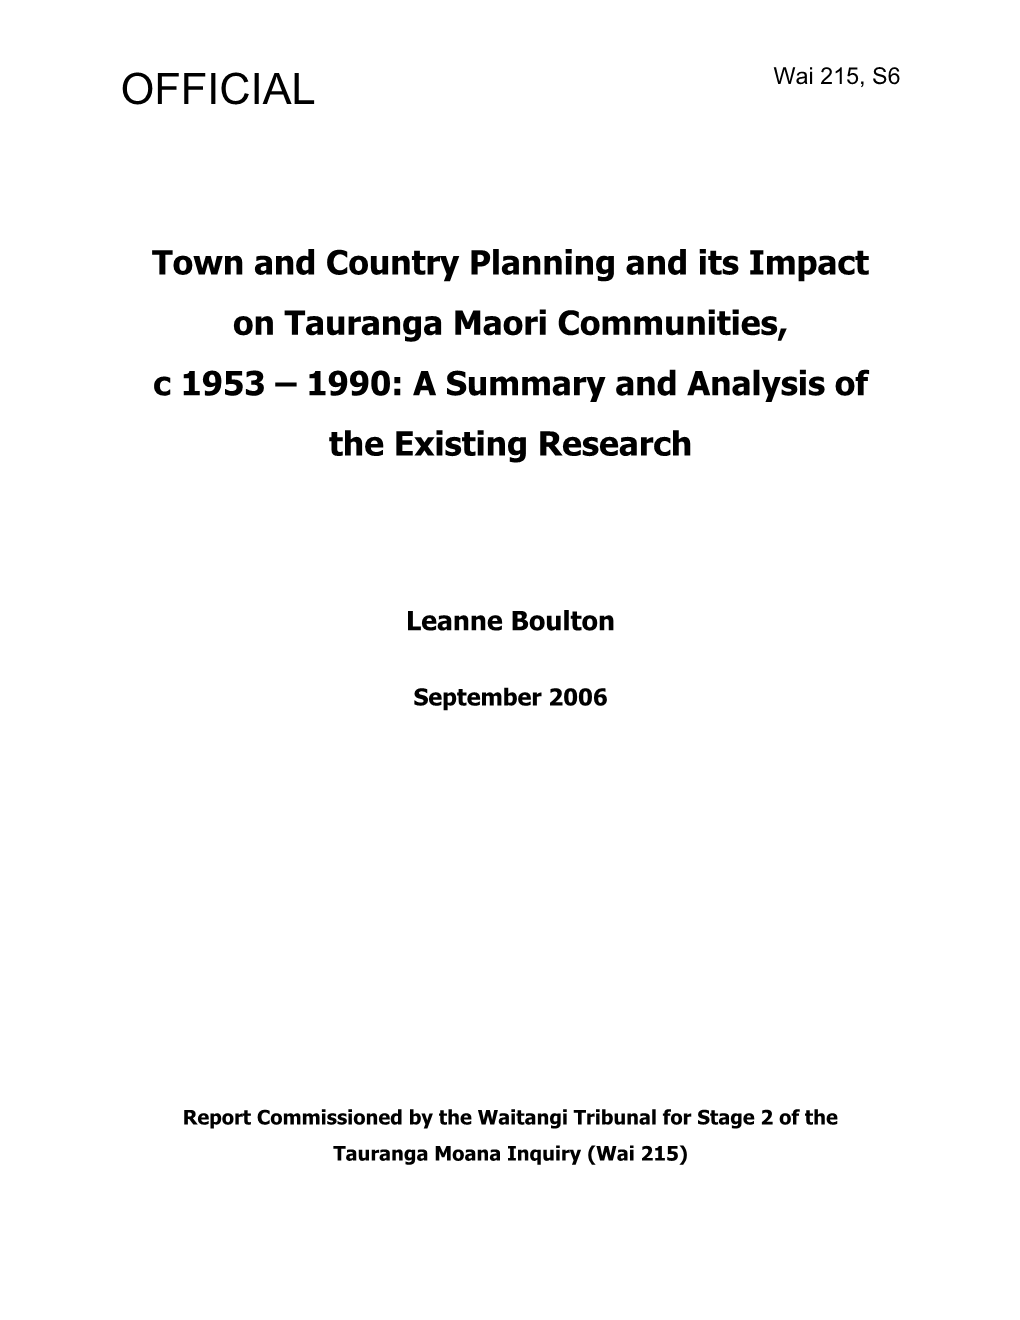 Town and Country Planning and Its Impact on Tauranga Maori Communities, C 1953 – 1990: a Summary and Analysis of the Existing Research